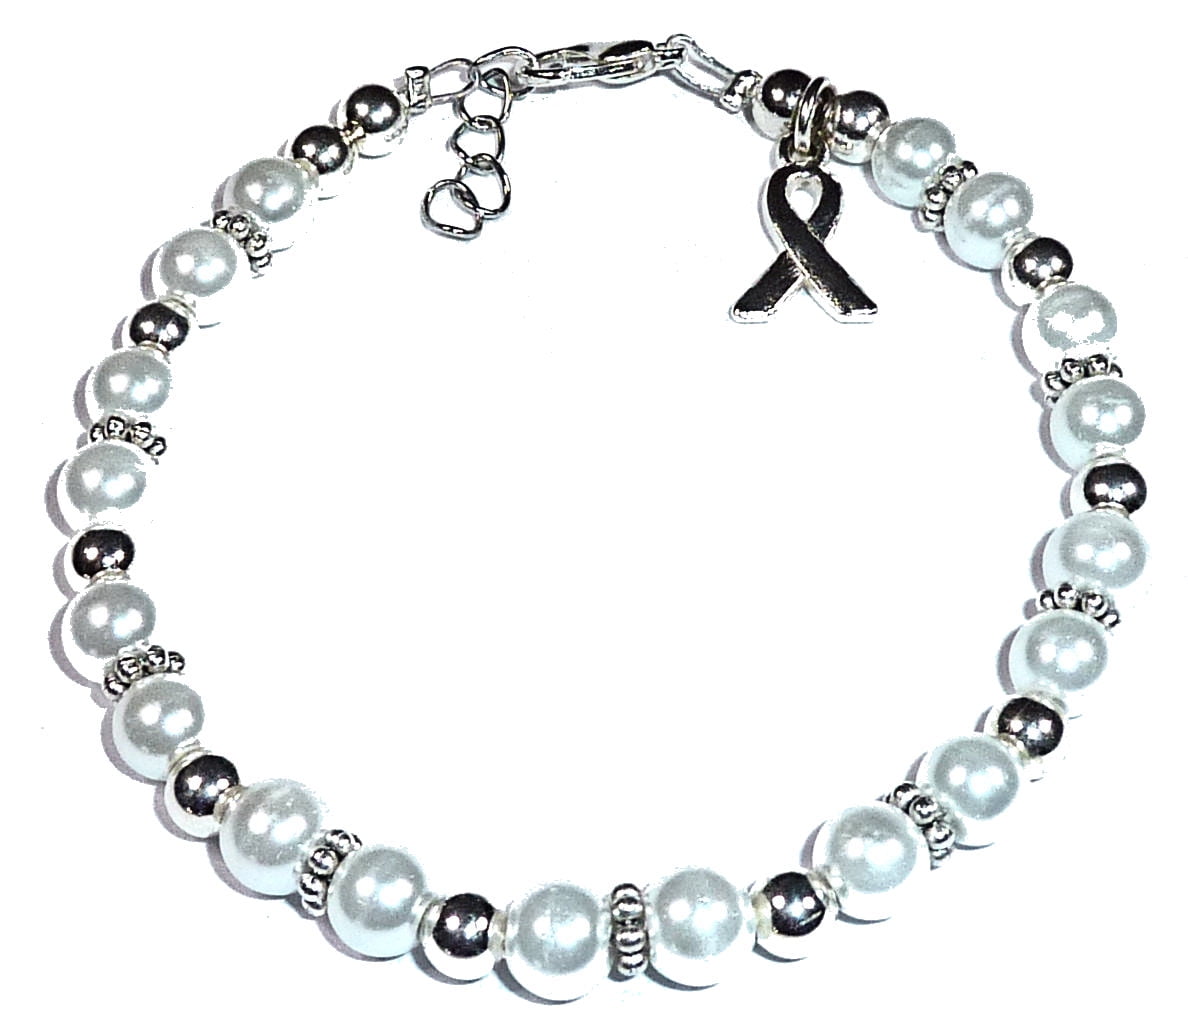 Lung Cancer Awareness Products  White Ribbon  Choose Hope